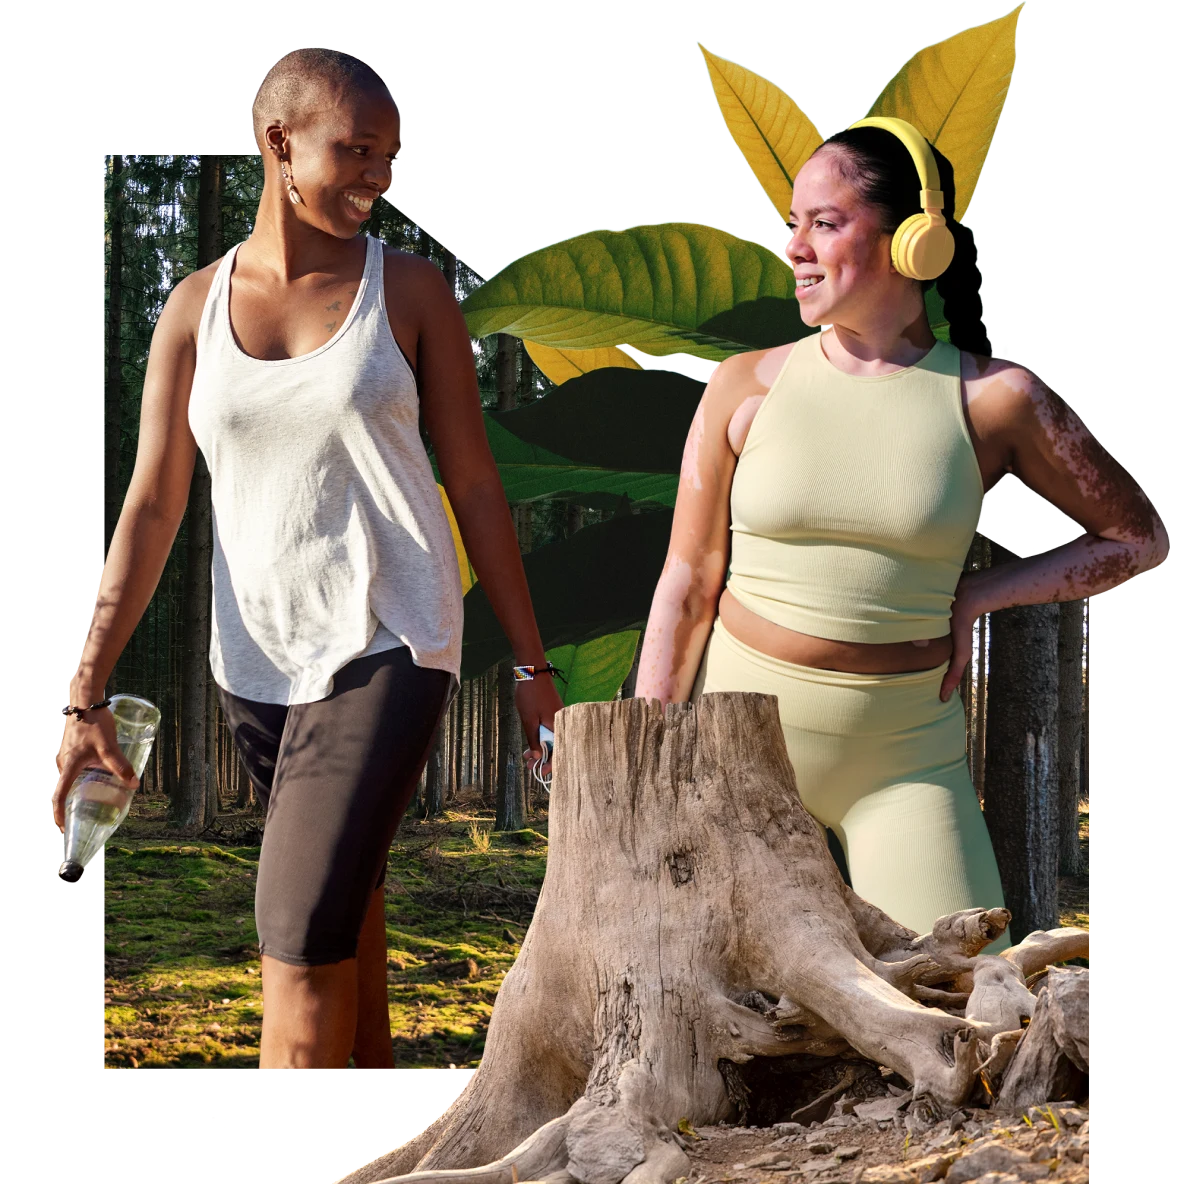 On the left, a smiling Black woman walks in exercise clothes, holding a bottle of water. On the right, a white woman is wearing exercise clothes and headphones. Tree trunk is in the foreground, with plants and a forest in the background.
